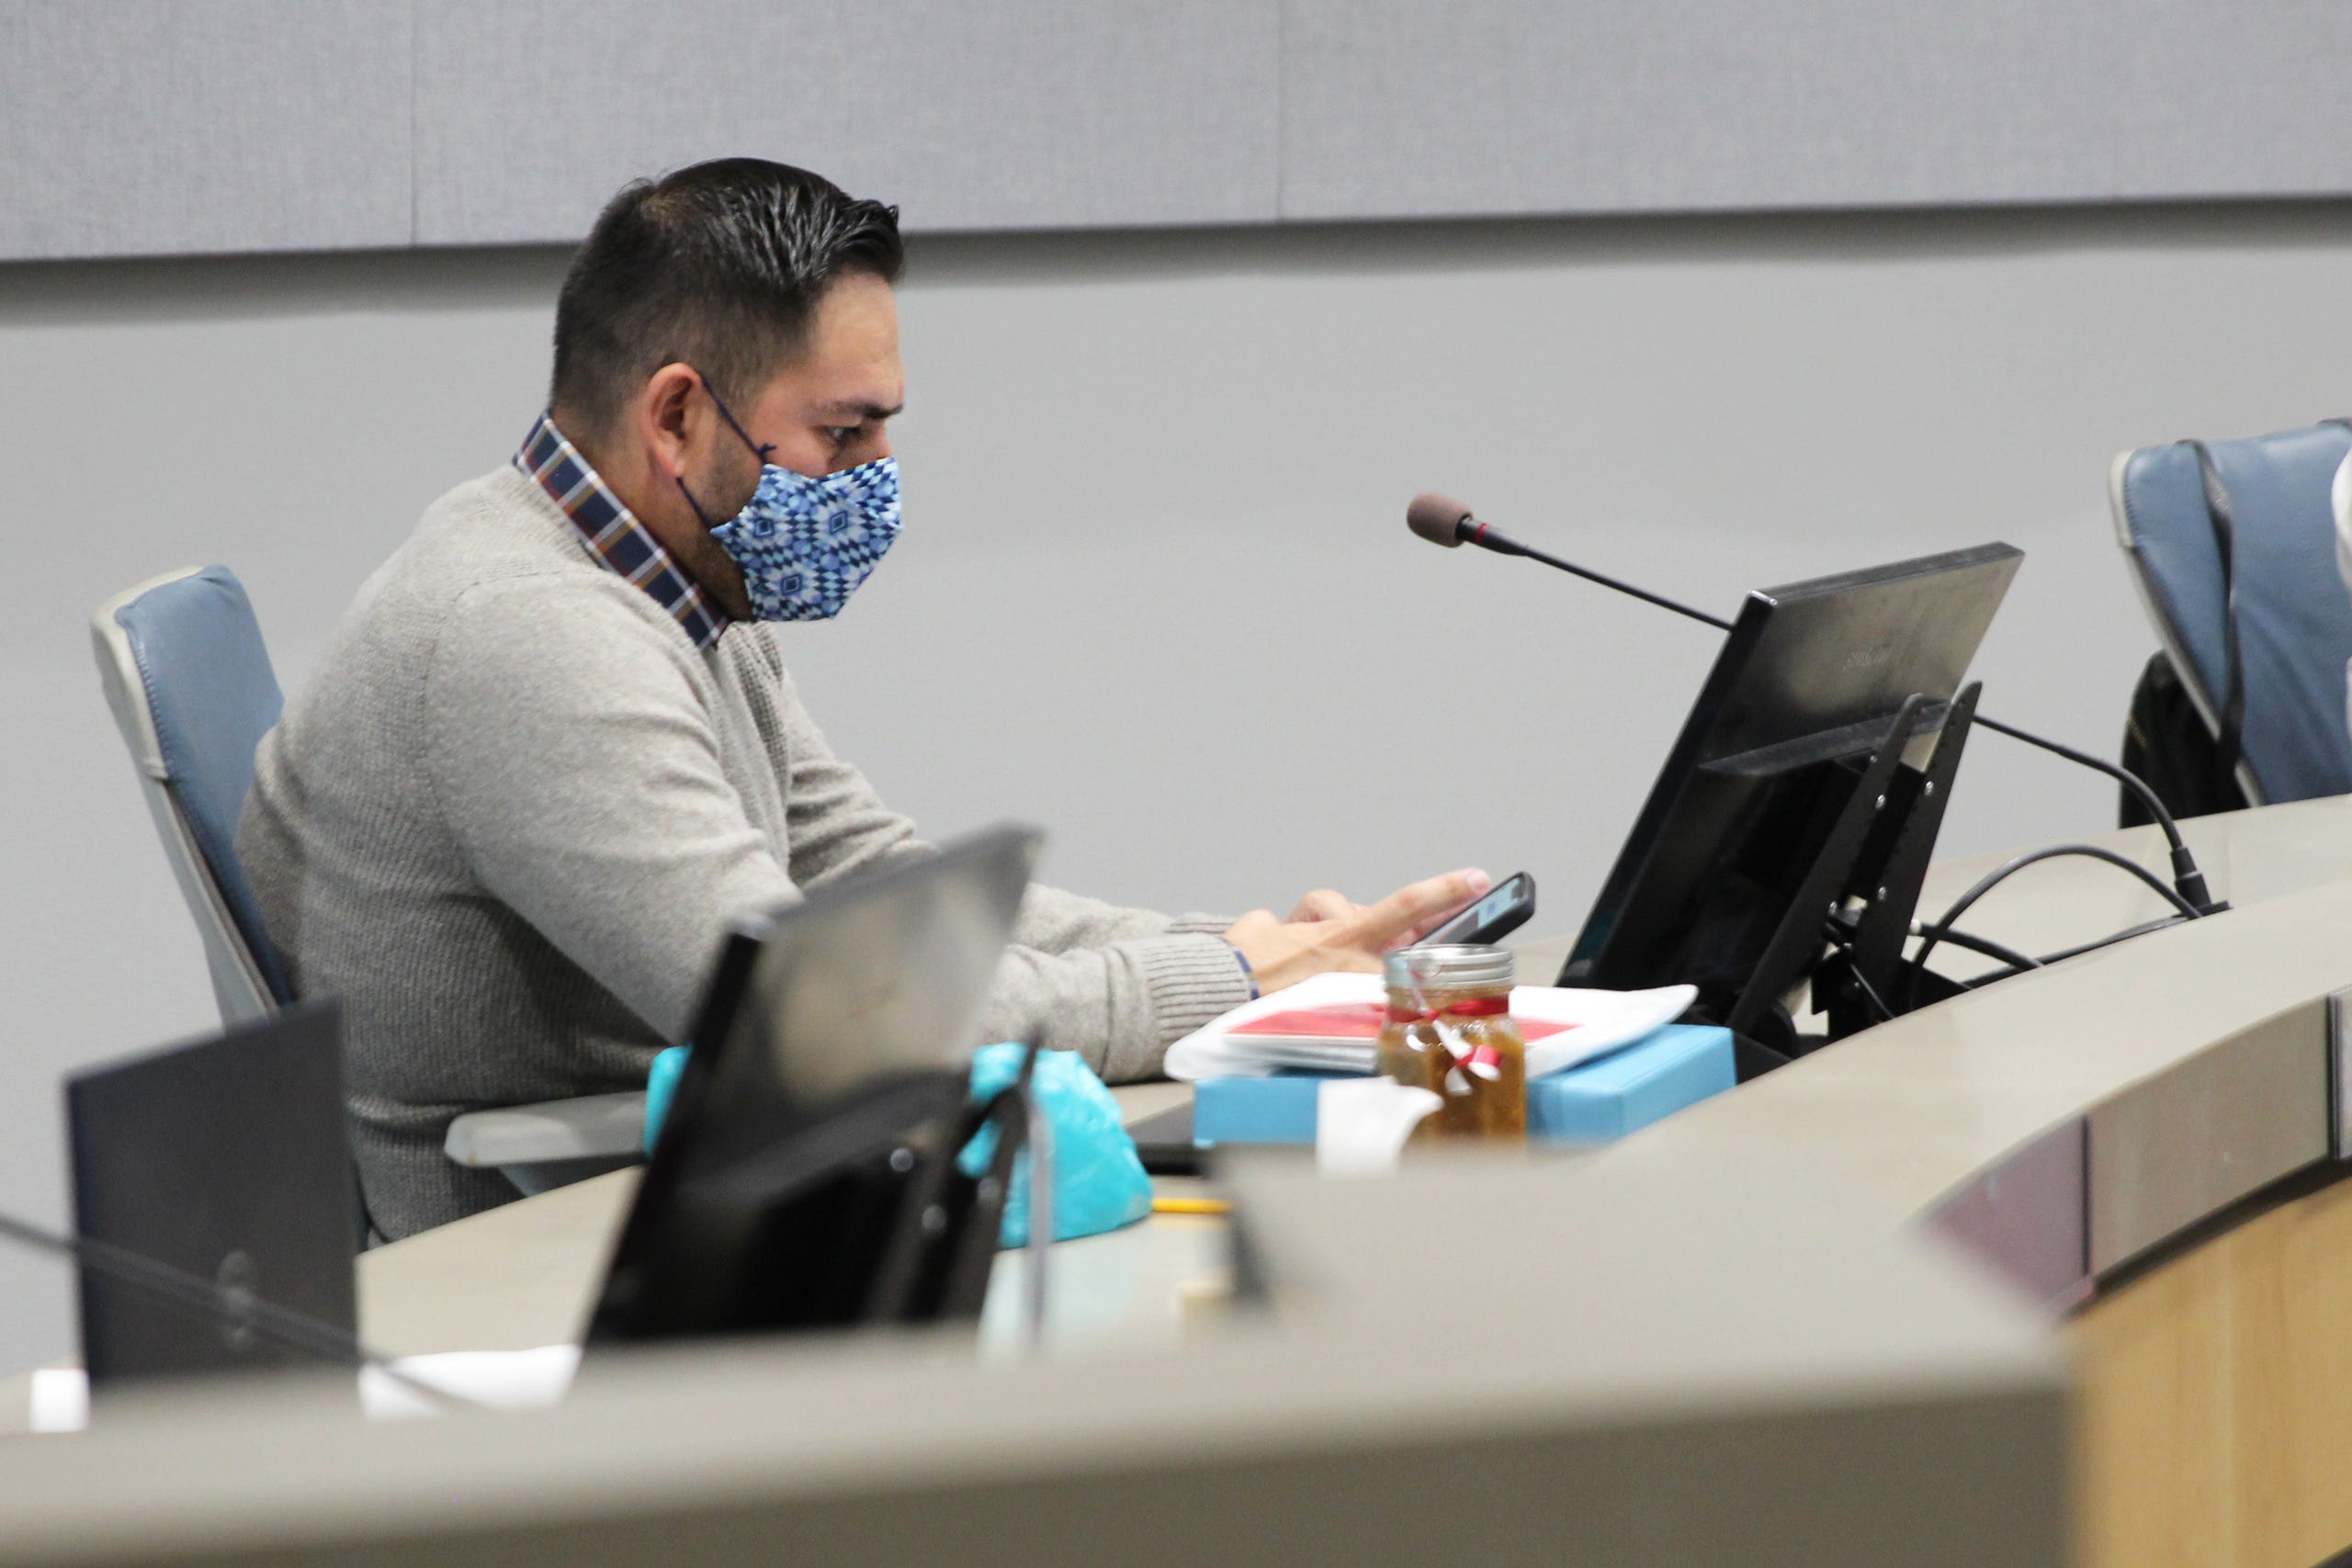 Gabe Vasquez, outgoing city councilor for district 3, checks his phone during his last city council meeting at Las Cruces City Hall on Monday, Dec. 20, 2021. Vasquez chose not to run in the 2021 election.